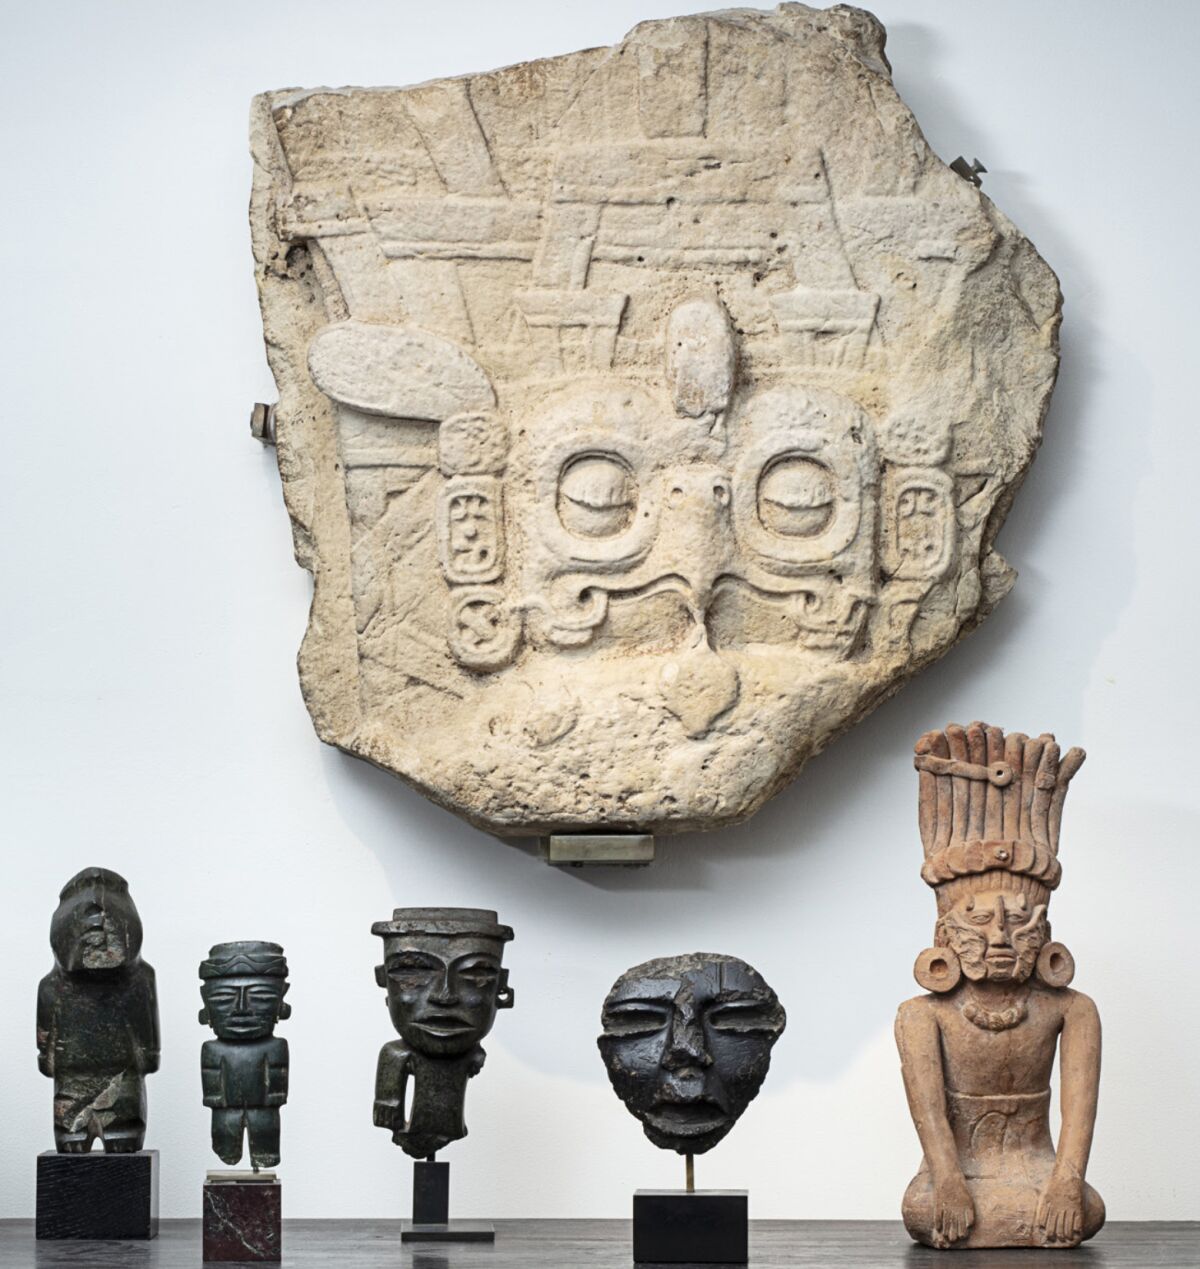 The large carved relief showing a Maya king's headdress with an owl motif is among works to be sold at auction in Paris.